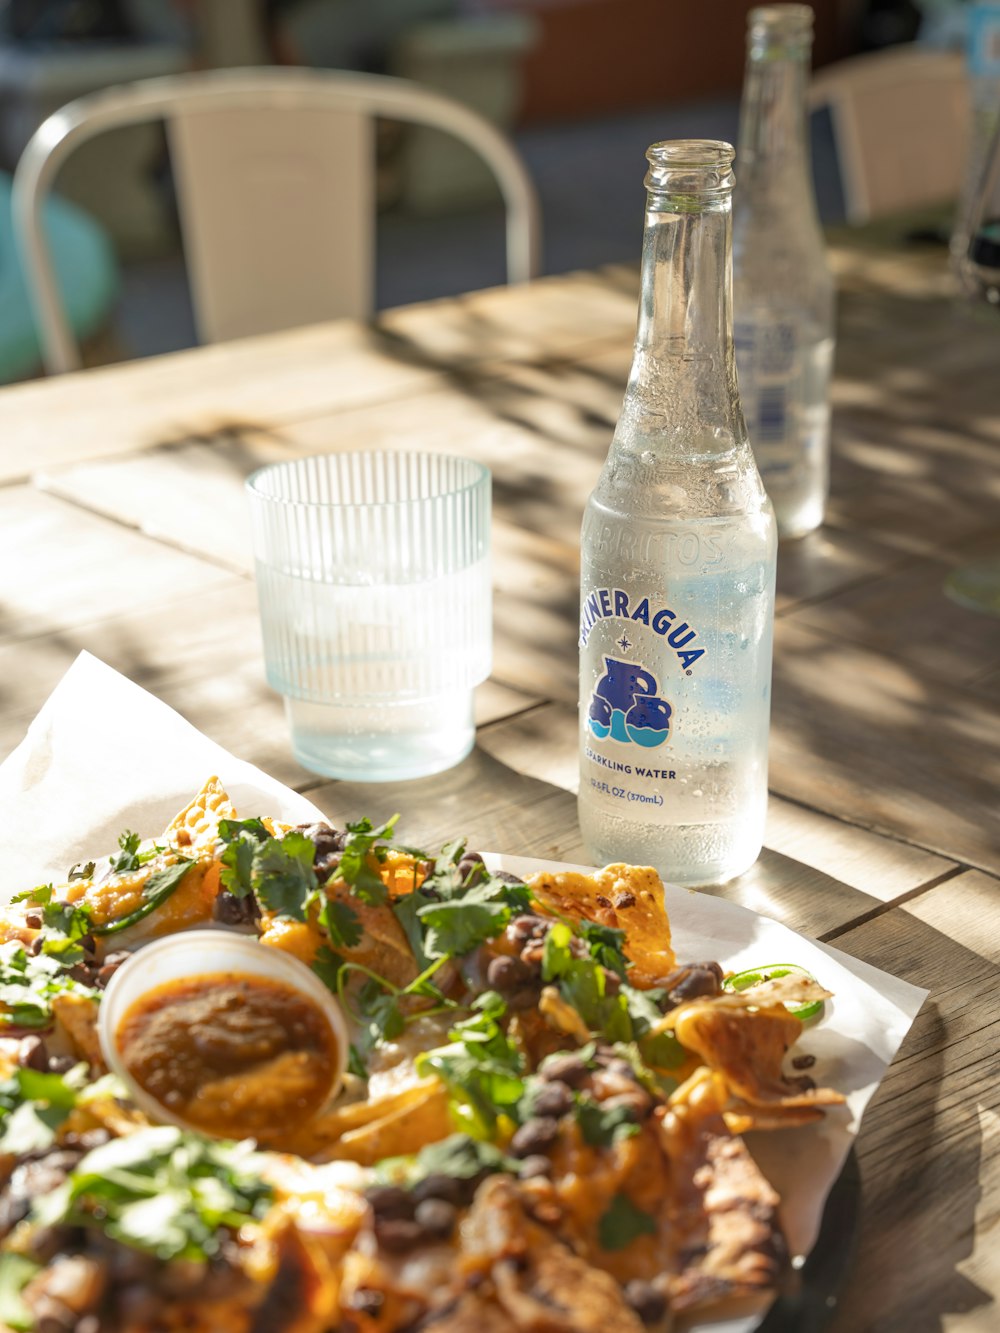 a plate of food and a bottle of water on a table